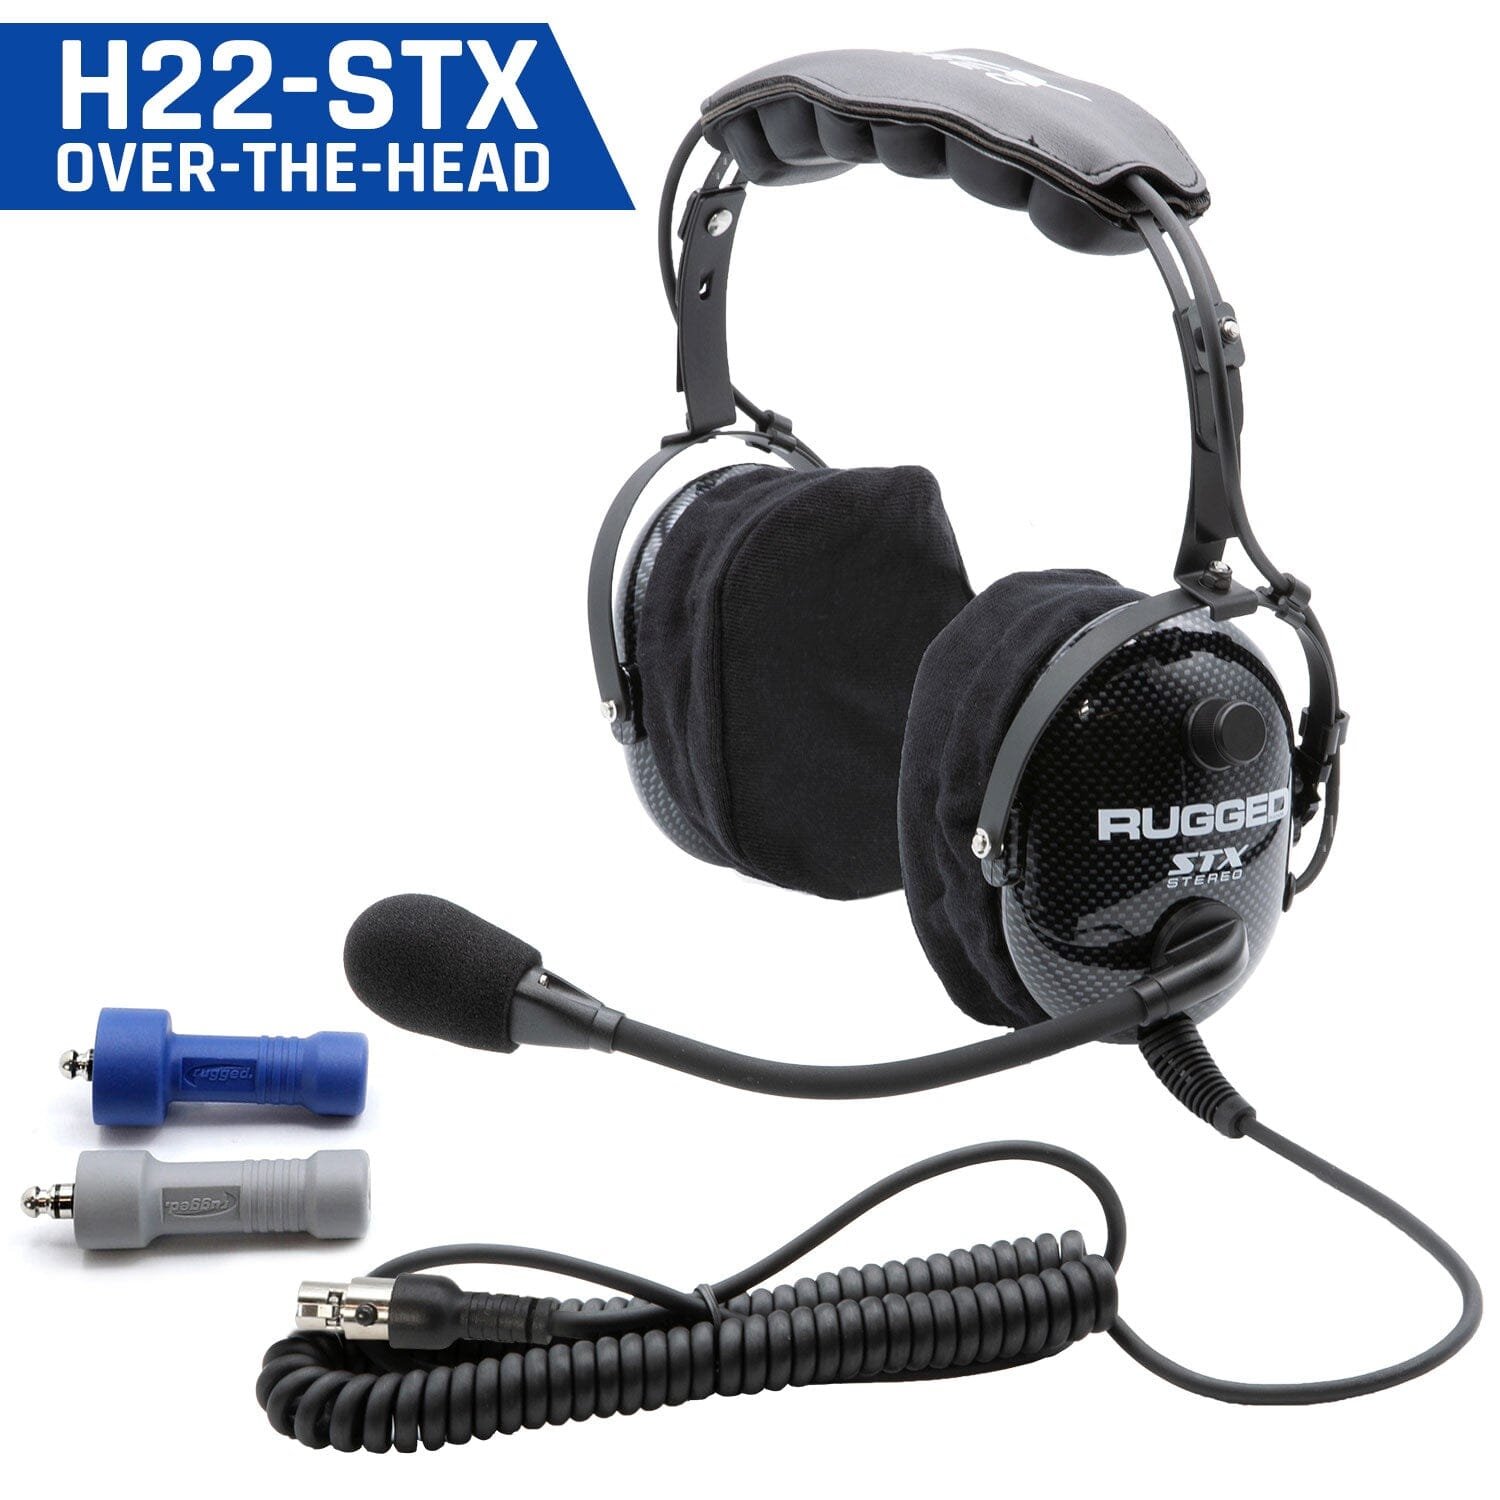 H42-STX ULTIMATE HEADSET, For STEREO & OFFROAD Intercoms, Over The Head or Behind The Head